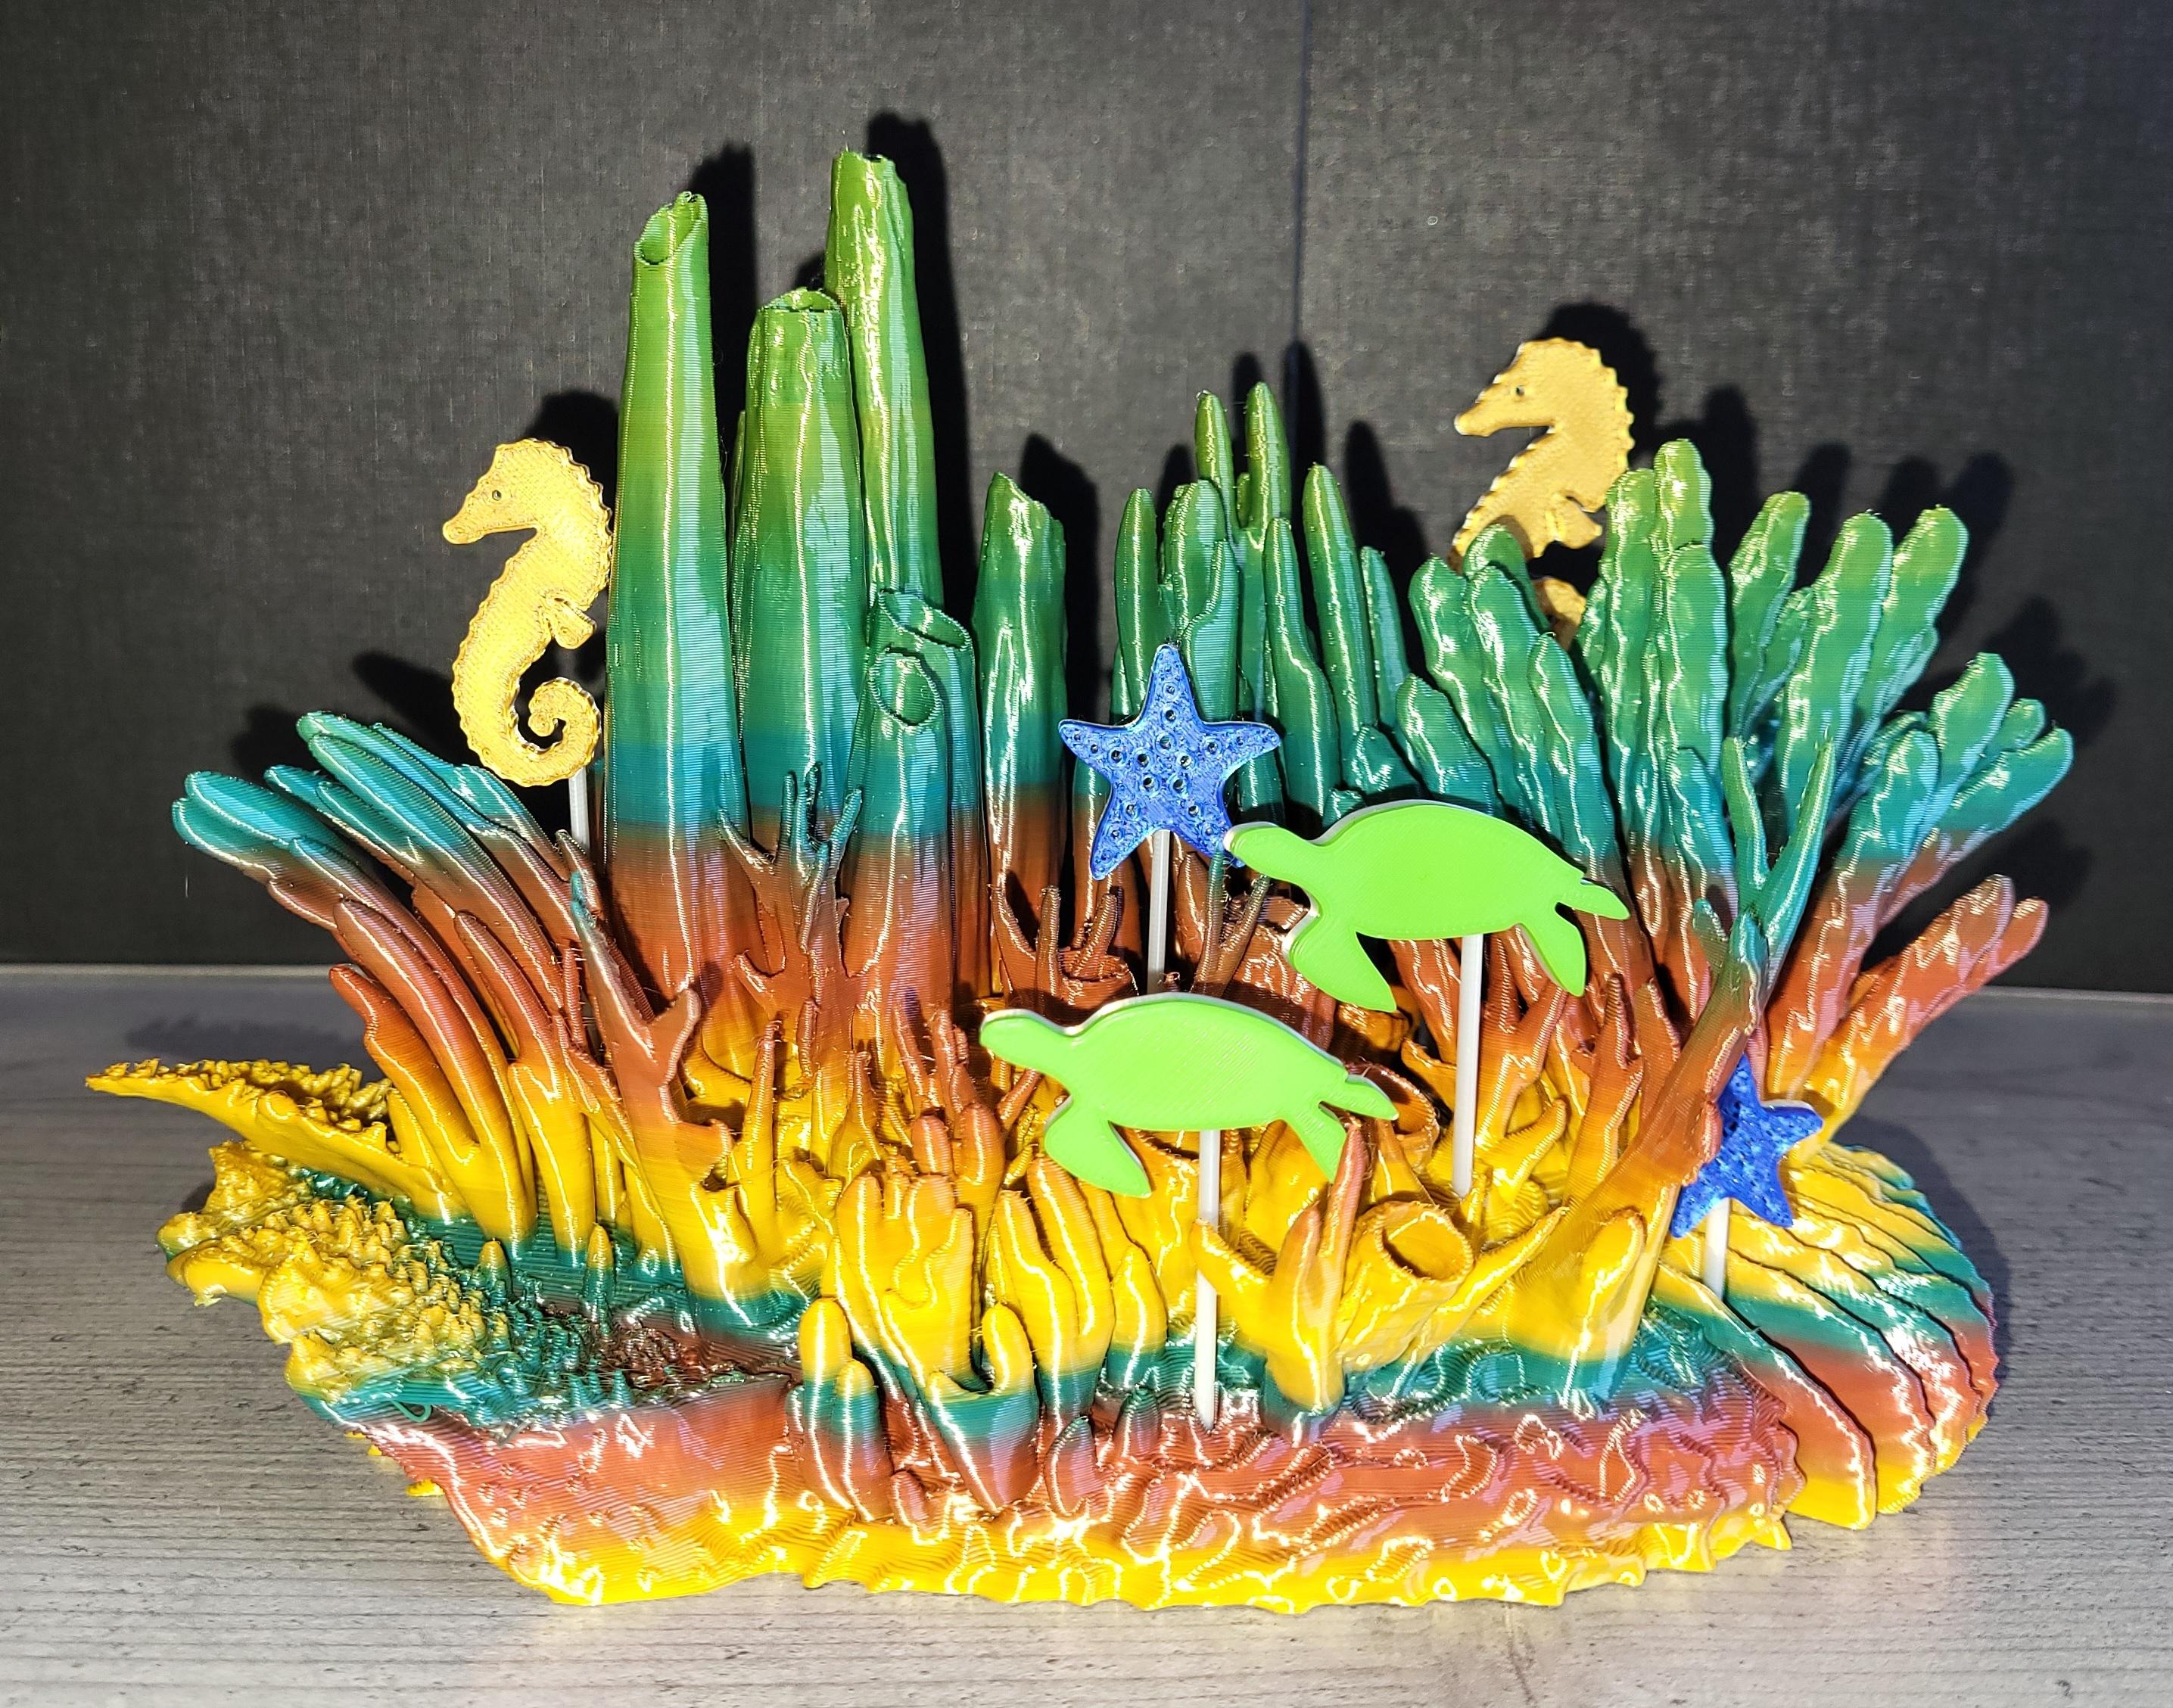 Coral Reef Scene - Printed using Eryone Mini-Rainbow PLA, 0.4mm nozzle, 0.3mm layer, supports from bed on Prusa MK3S+

Thanks for this fine model! - 3d model